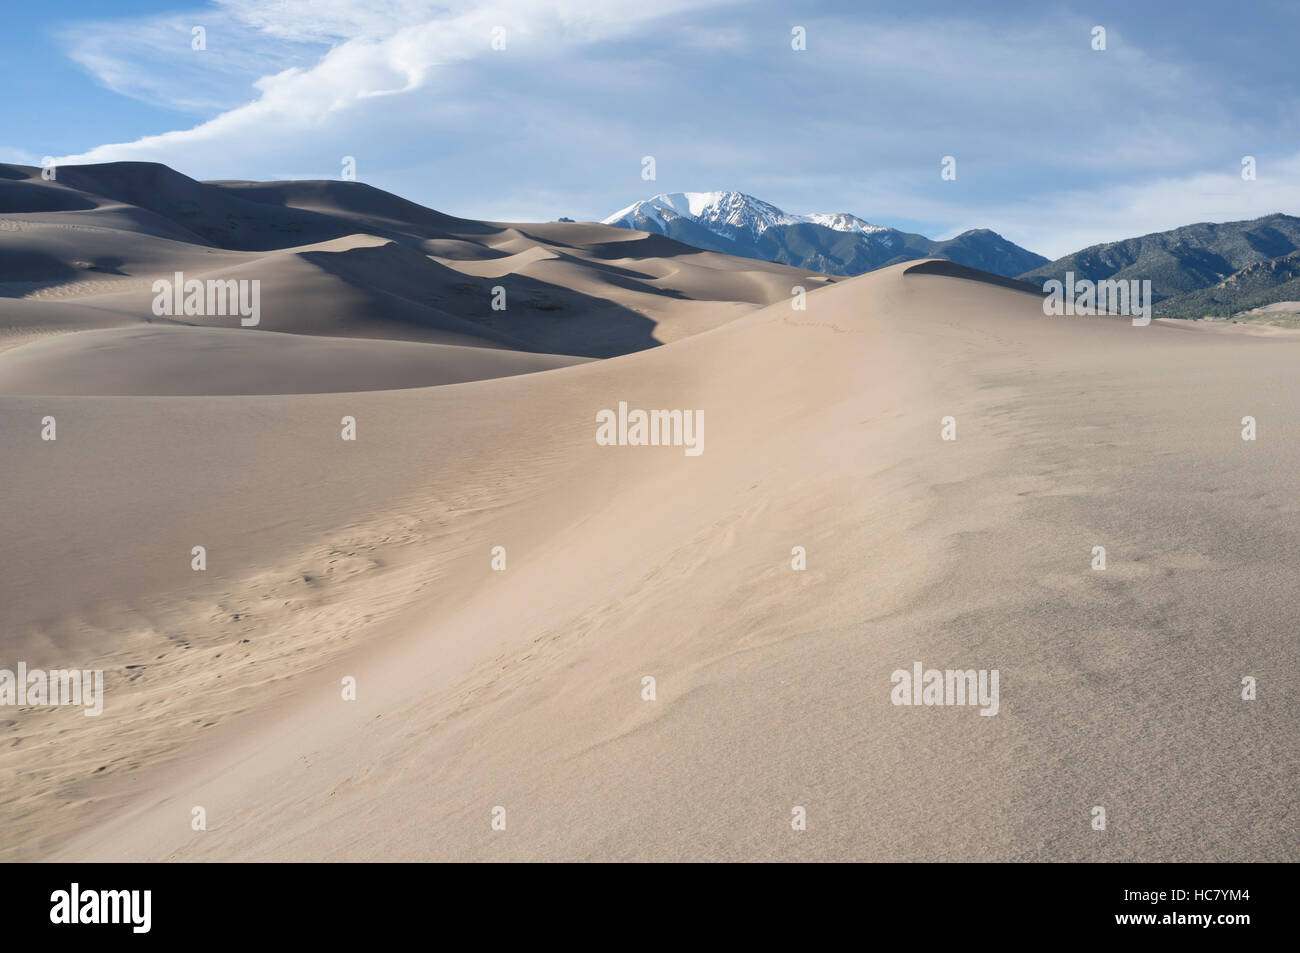 Saguache County, Colorado: High Dune at Great Sand Dunes National Park and Preserve. Stock Photo